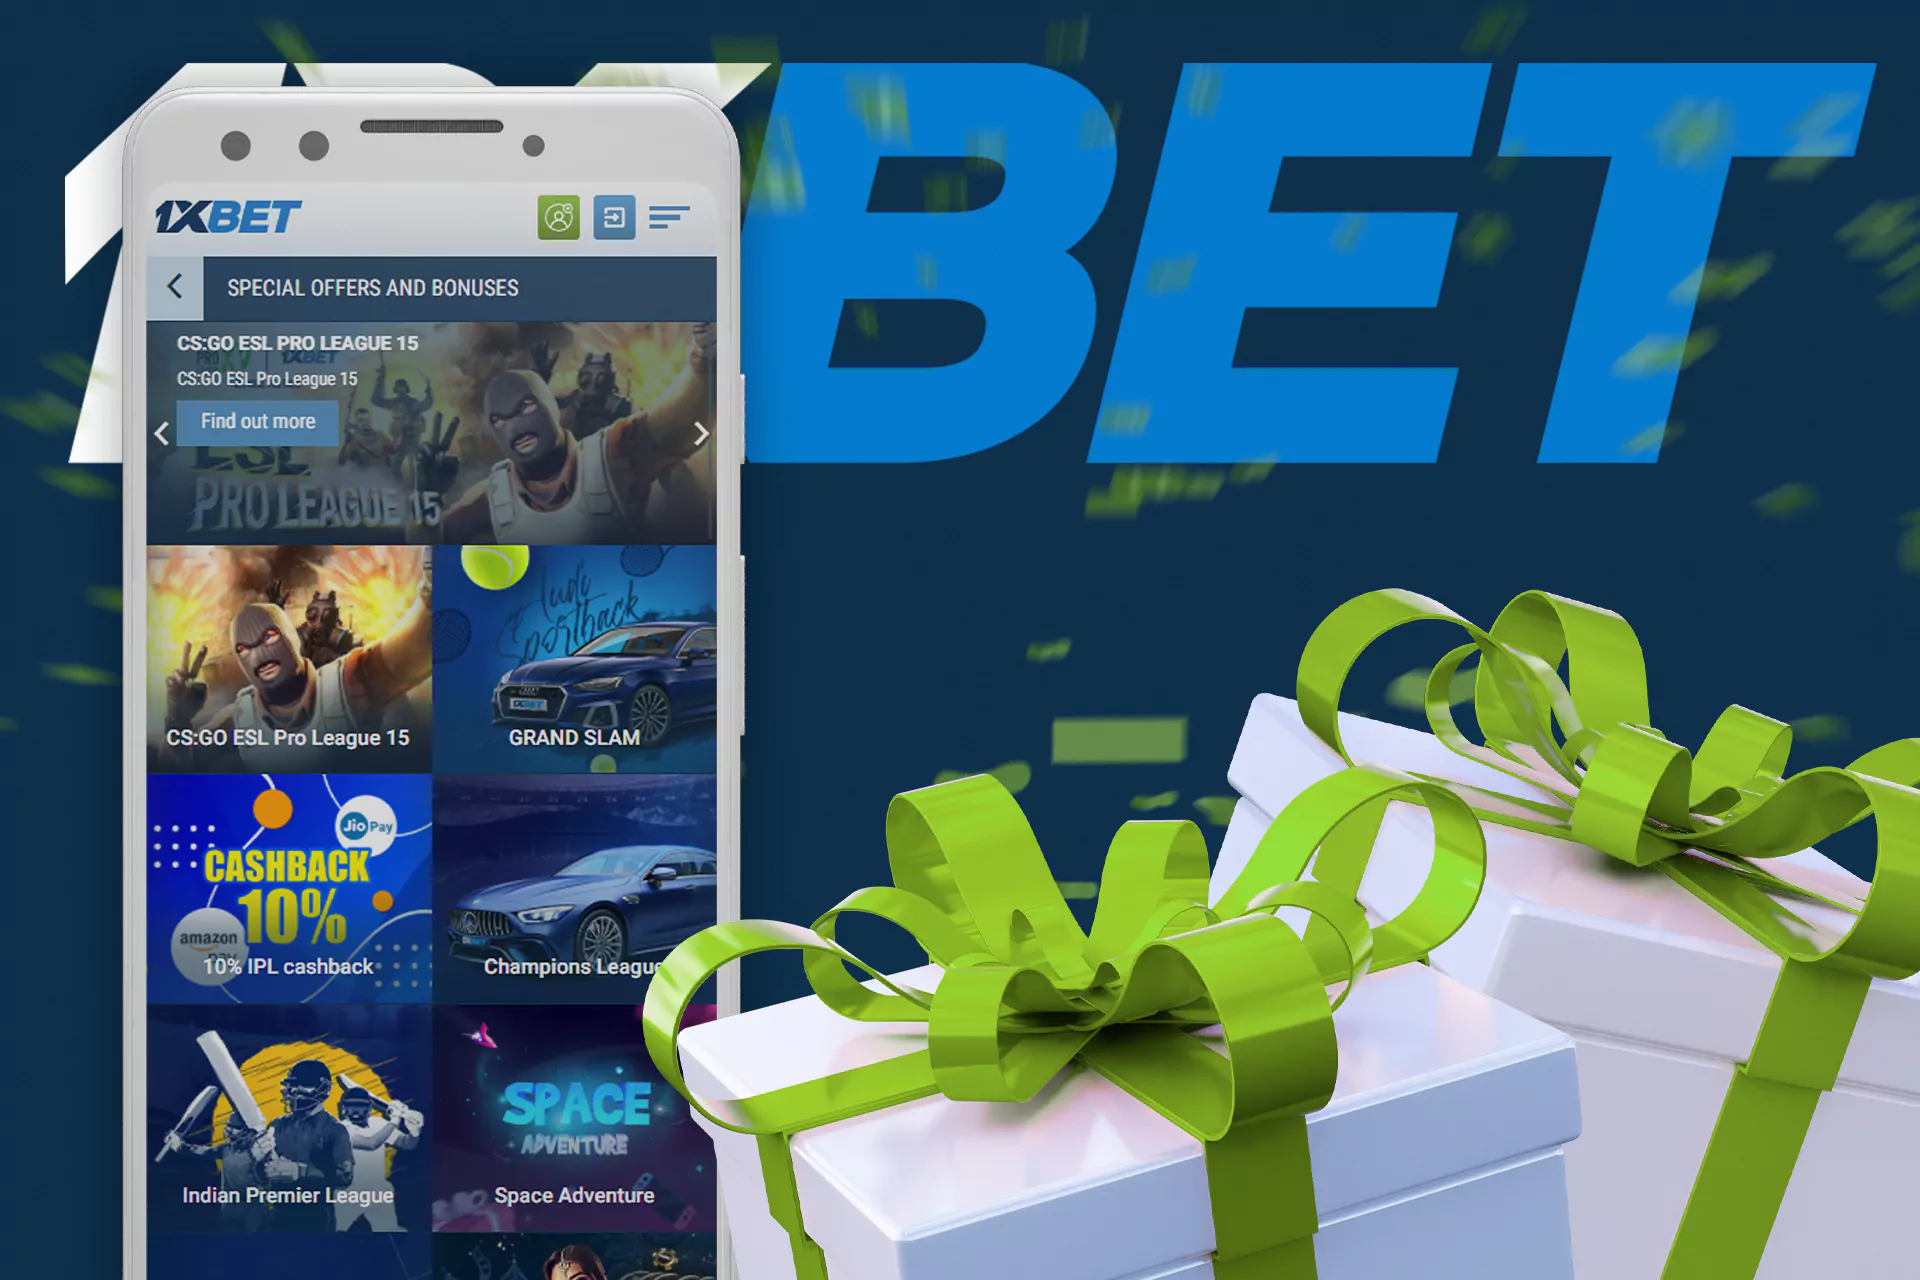 There are different types of bonuses available in the 1xBet app.